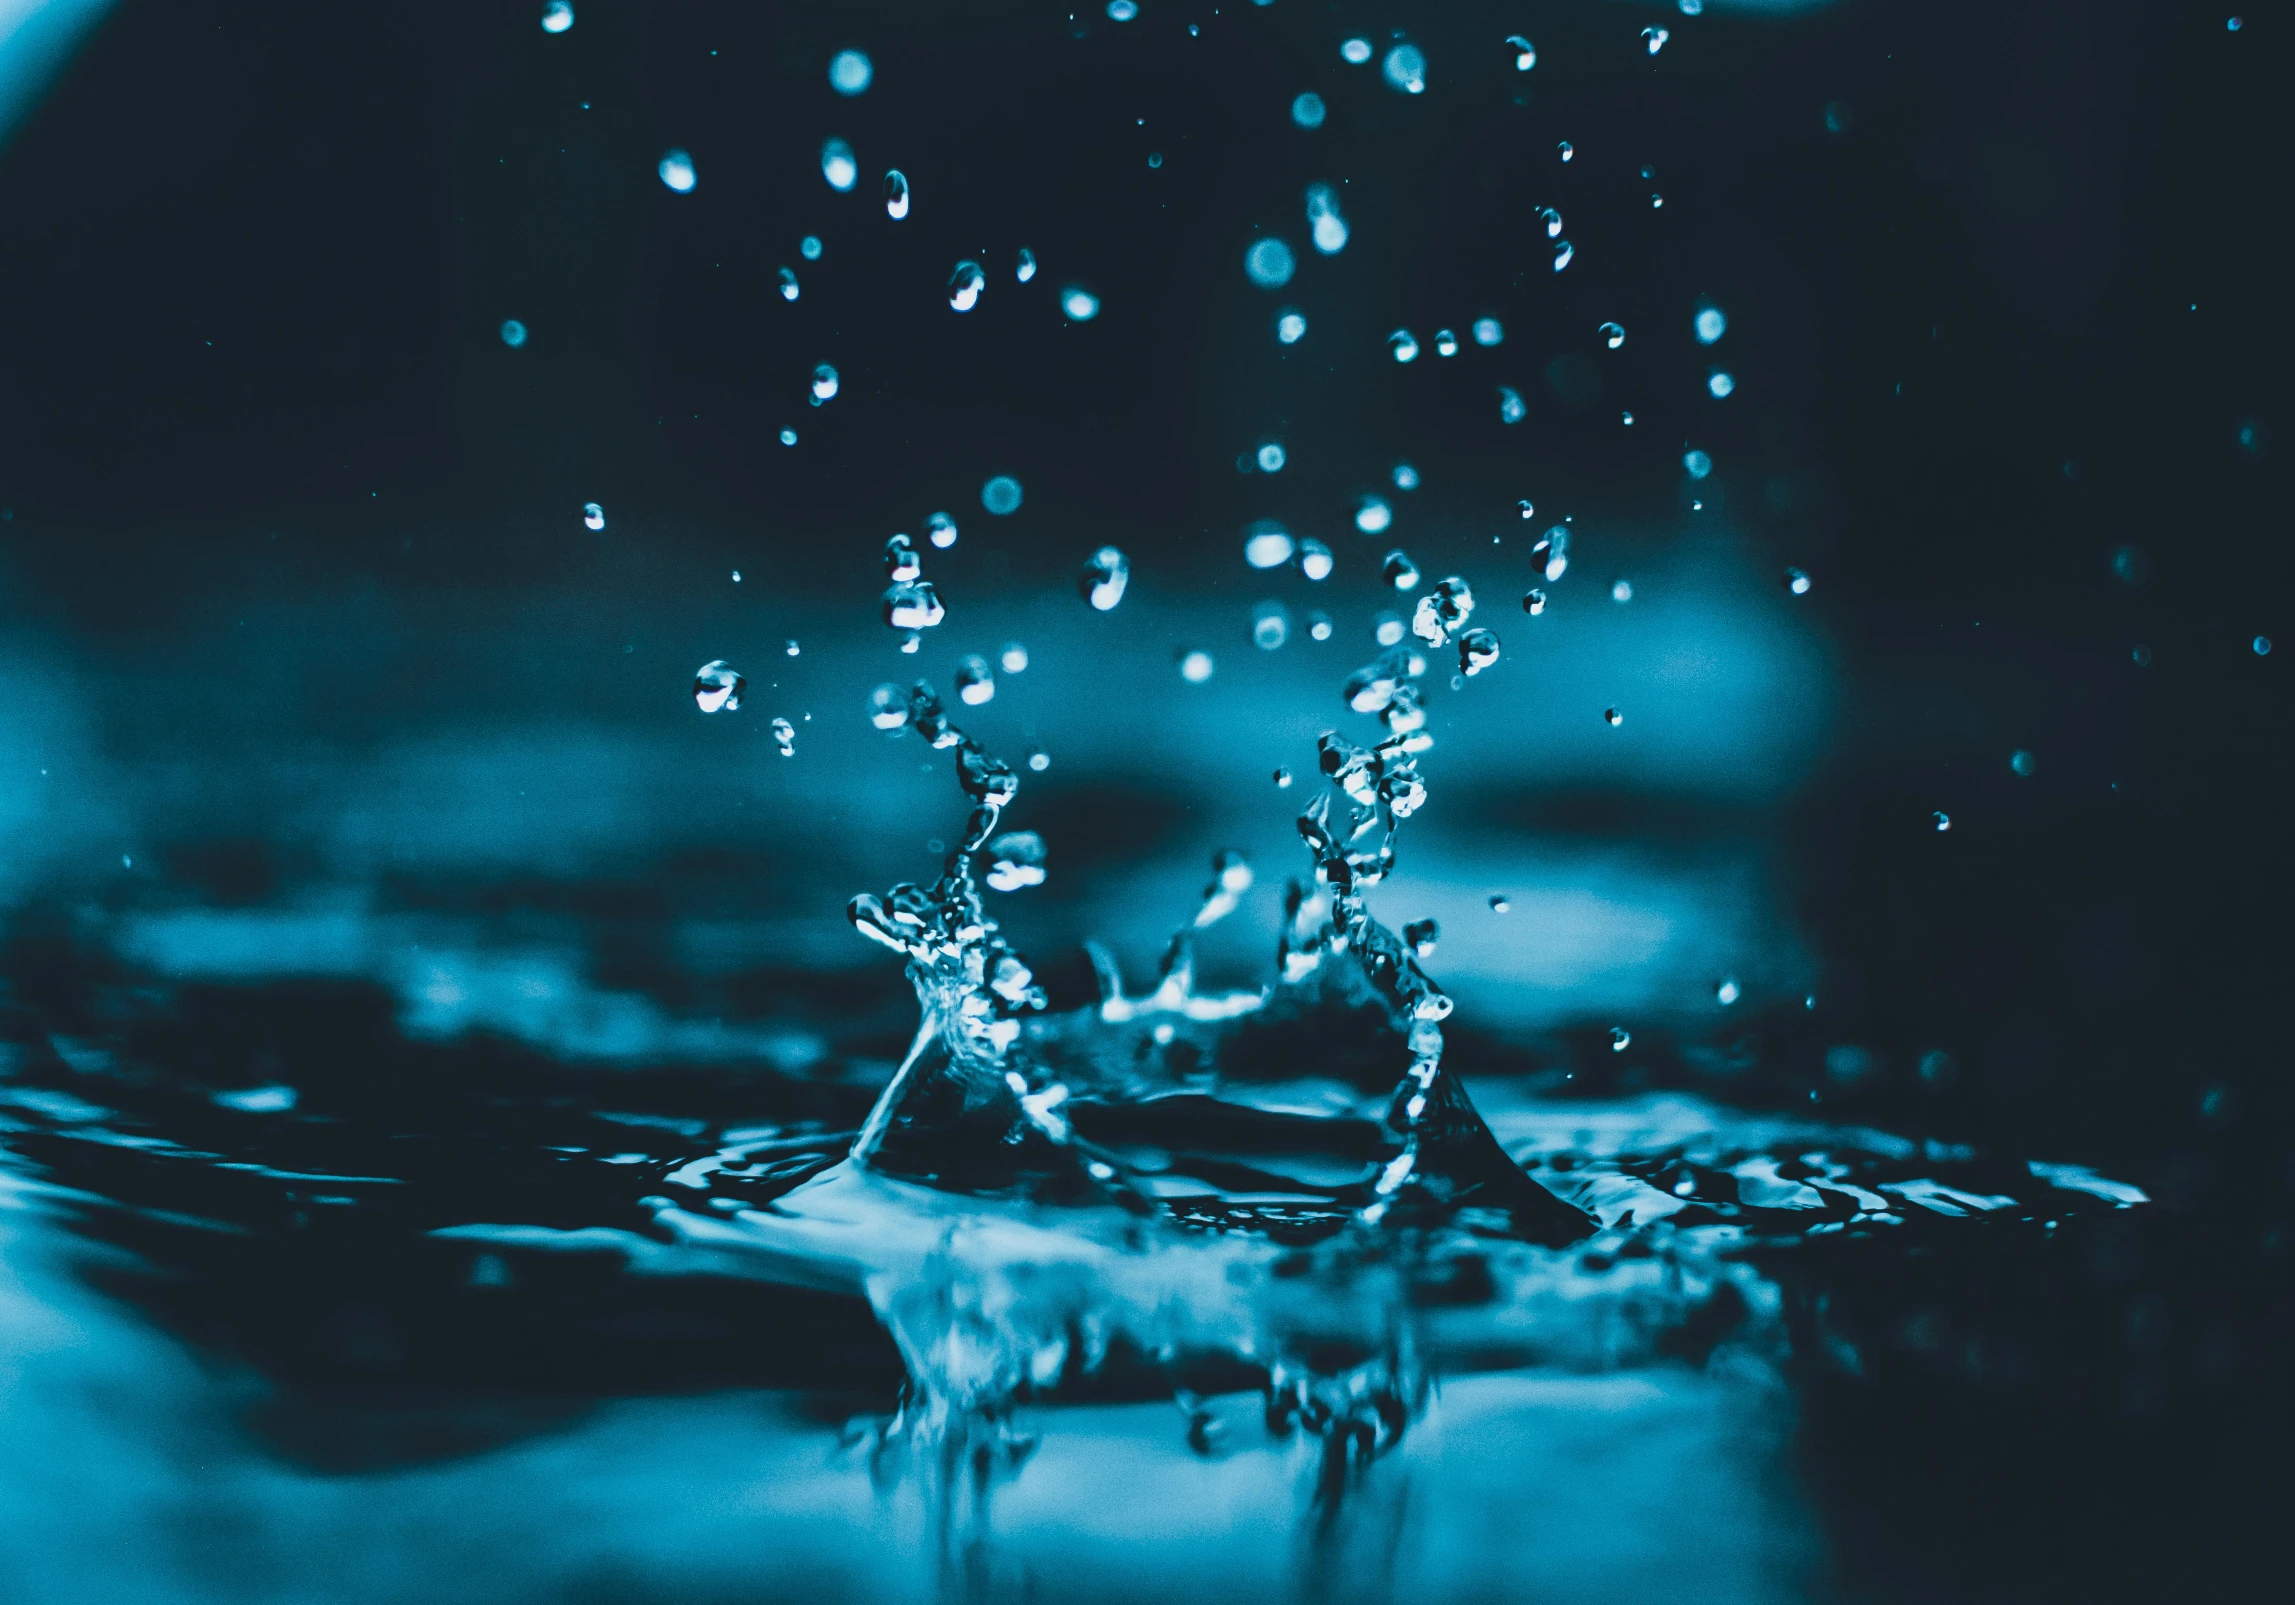 a splash of water on top of a blue surface, an album cover, pexels contest winner, visual art, raining at night, hydration, intricate water, background image